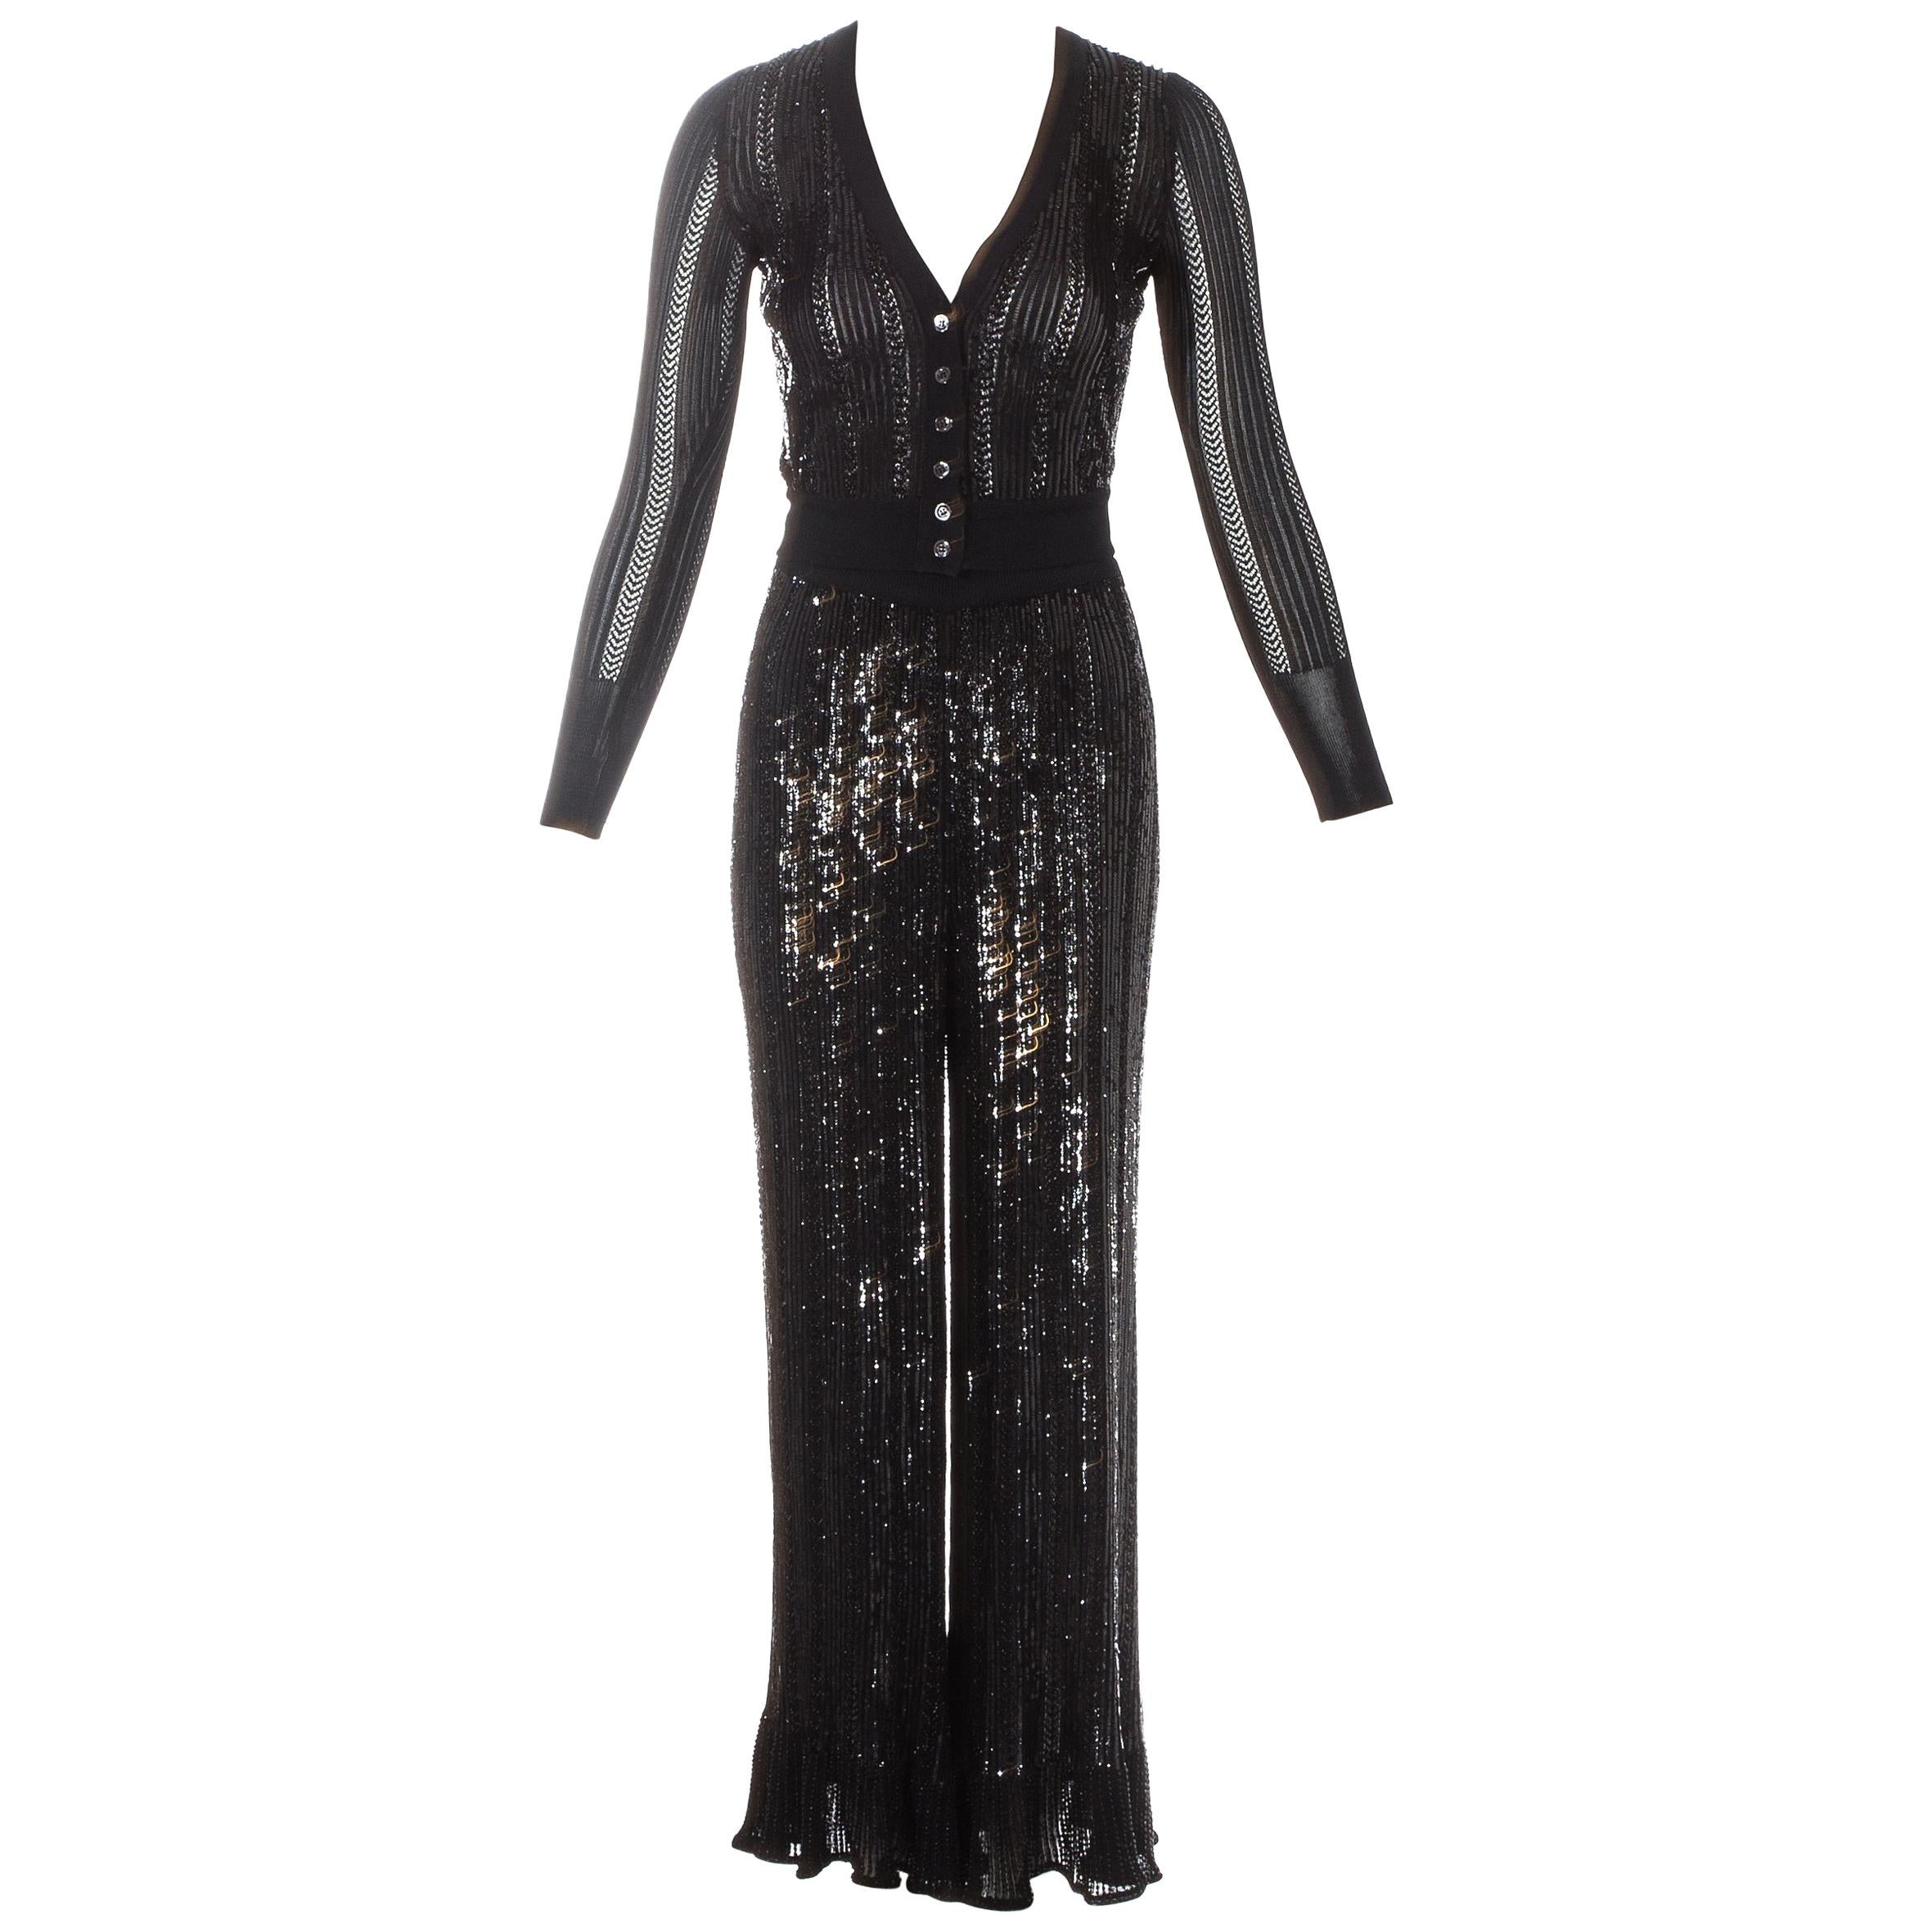 Azzedine Alaia black sequin and beaded 3-piece pant suit, ss 1996